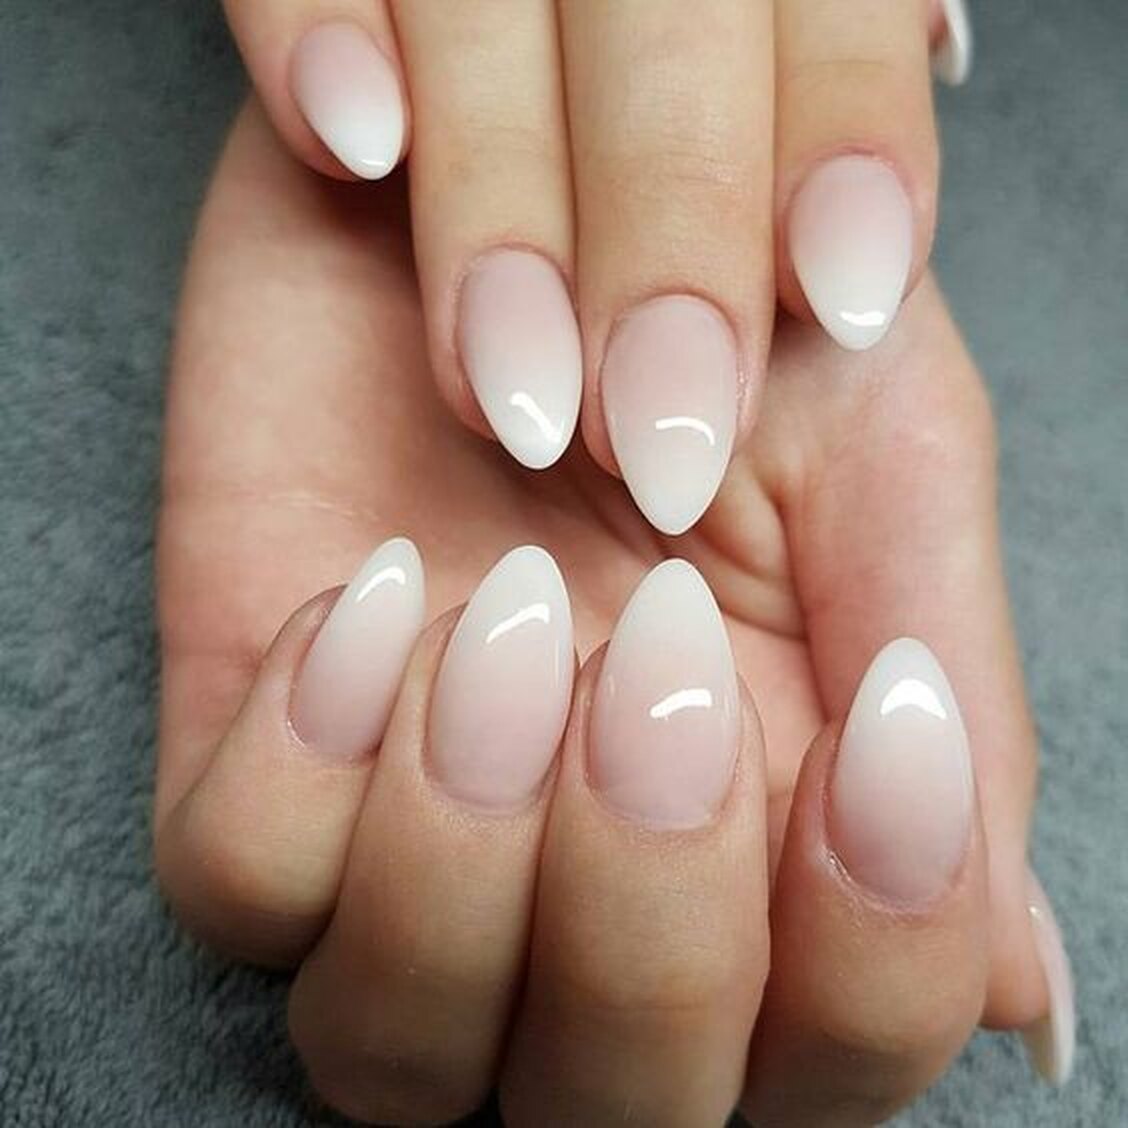 Oval Nail Shape 1 75+ Hottest Looking Nail Shapes for Women - 19